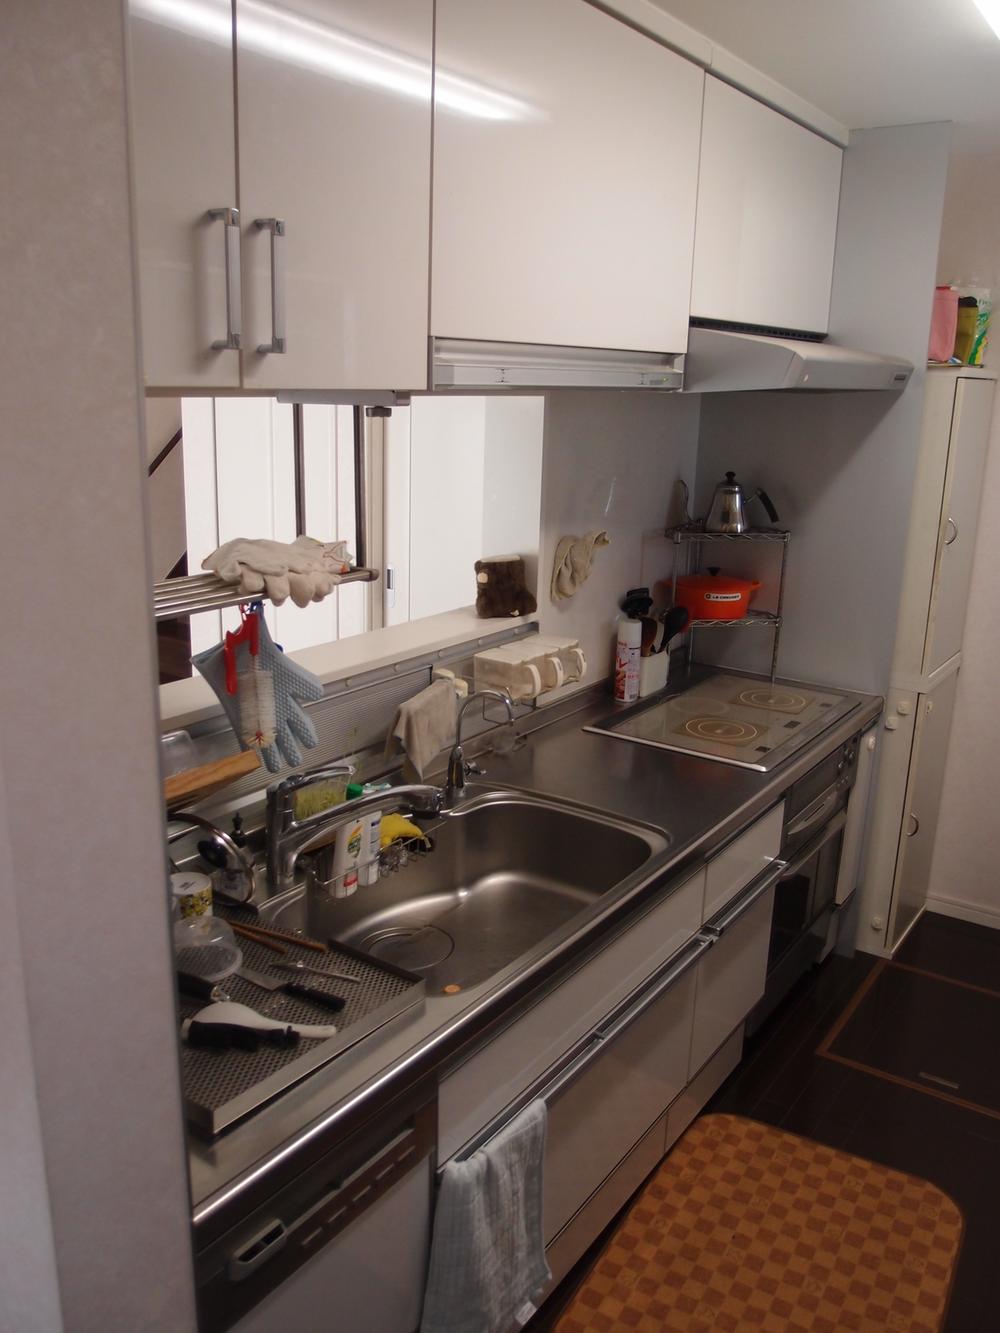 Kitchen. IH cooking heater, Dishwasher, There is a built-in microwave oven.